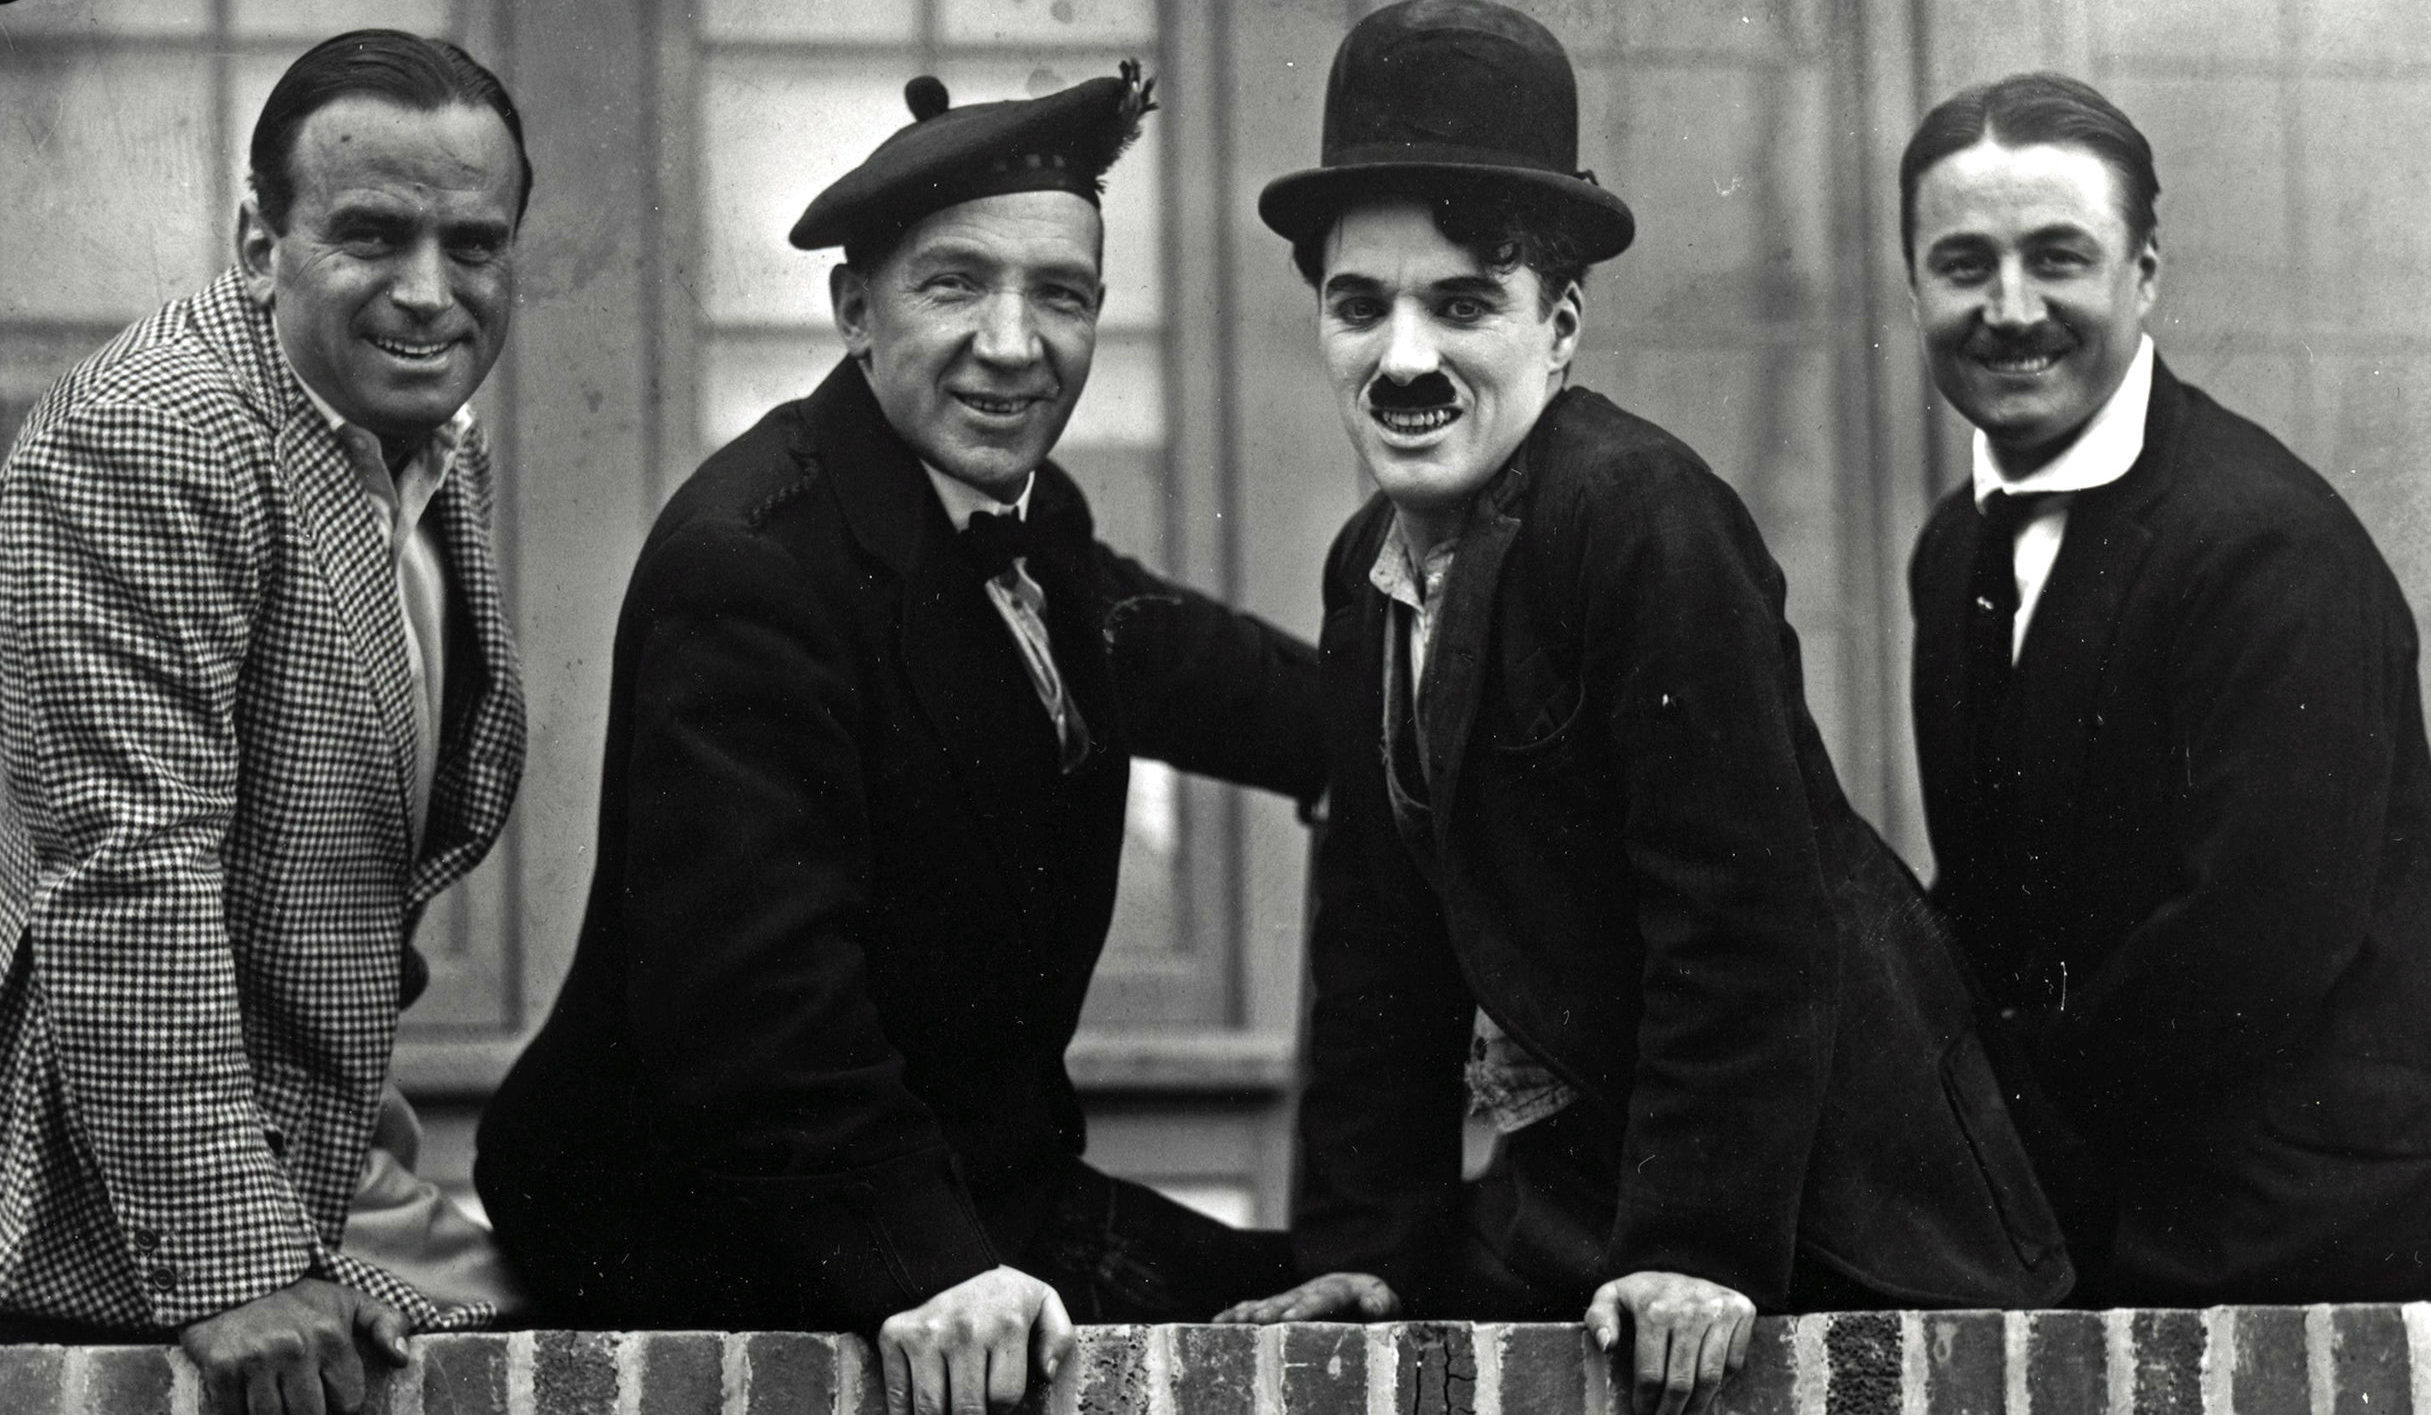 Sir Harry Lauder (second right) with Sir Charlie Chaplin (second left), as a rare screening of the moment they met on film is to be shown at a new comedy film festival (Roy Export Company/PA Wire)